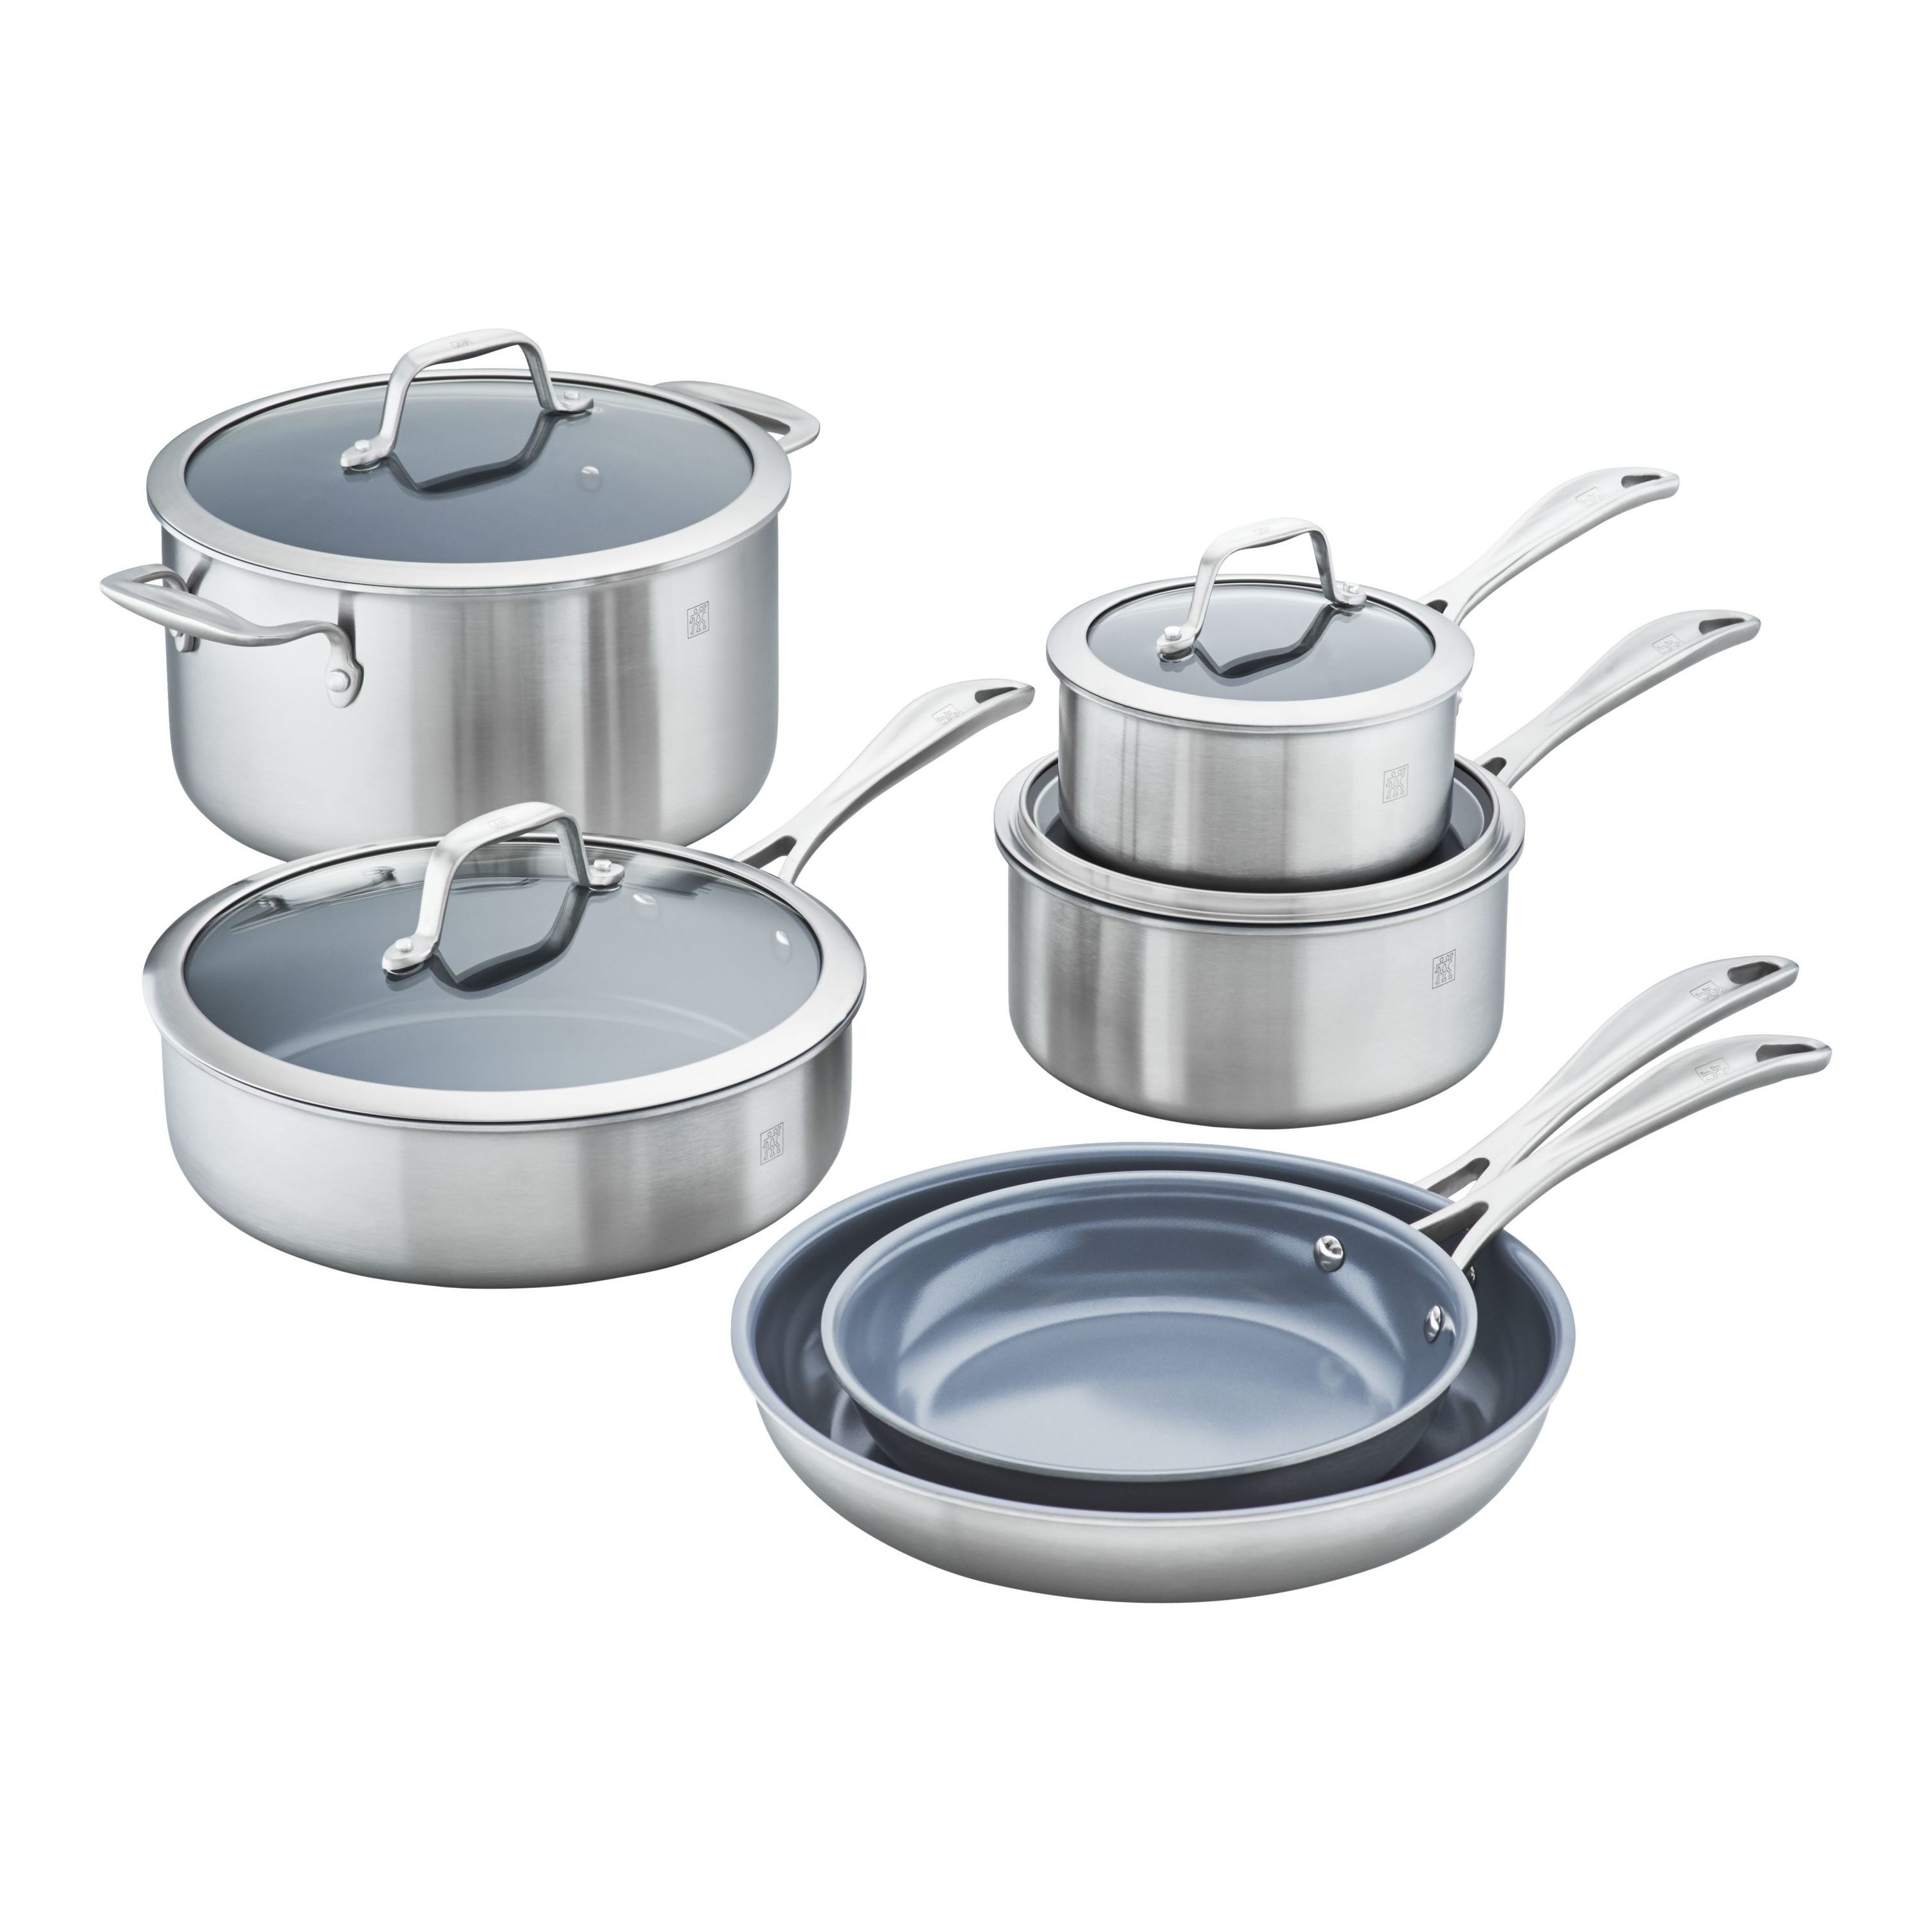 Easy to Clean Details about   Stainless Steel 3-Quart Stock Pot with Tempered Glass Lid 